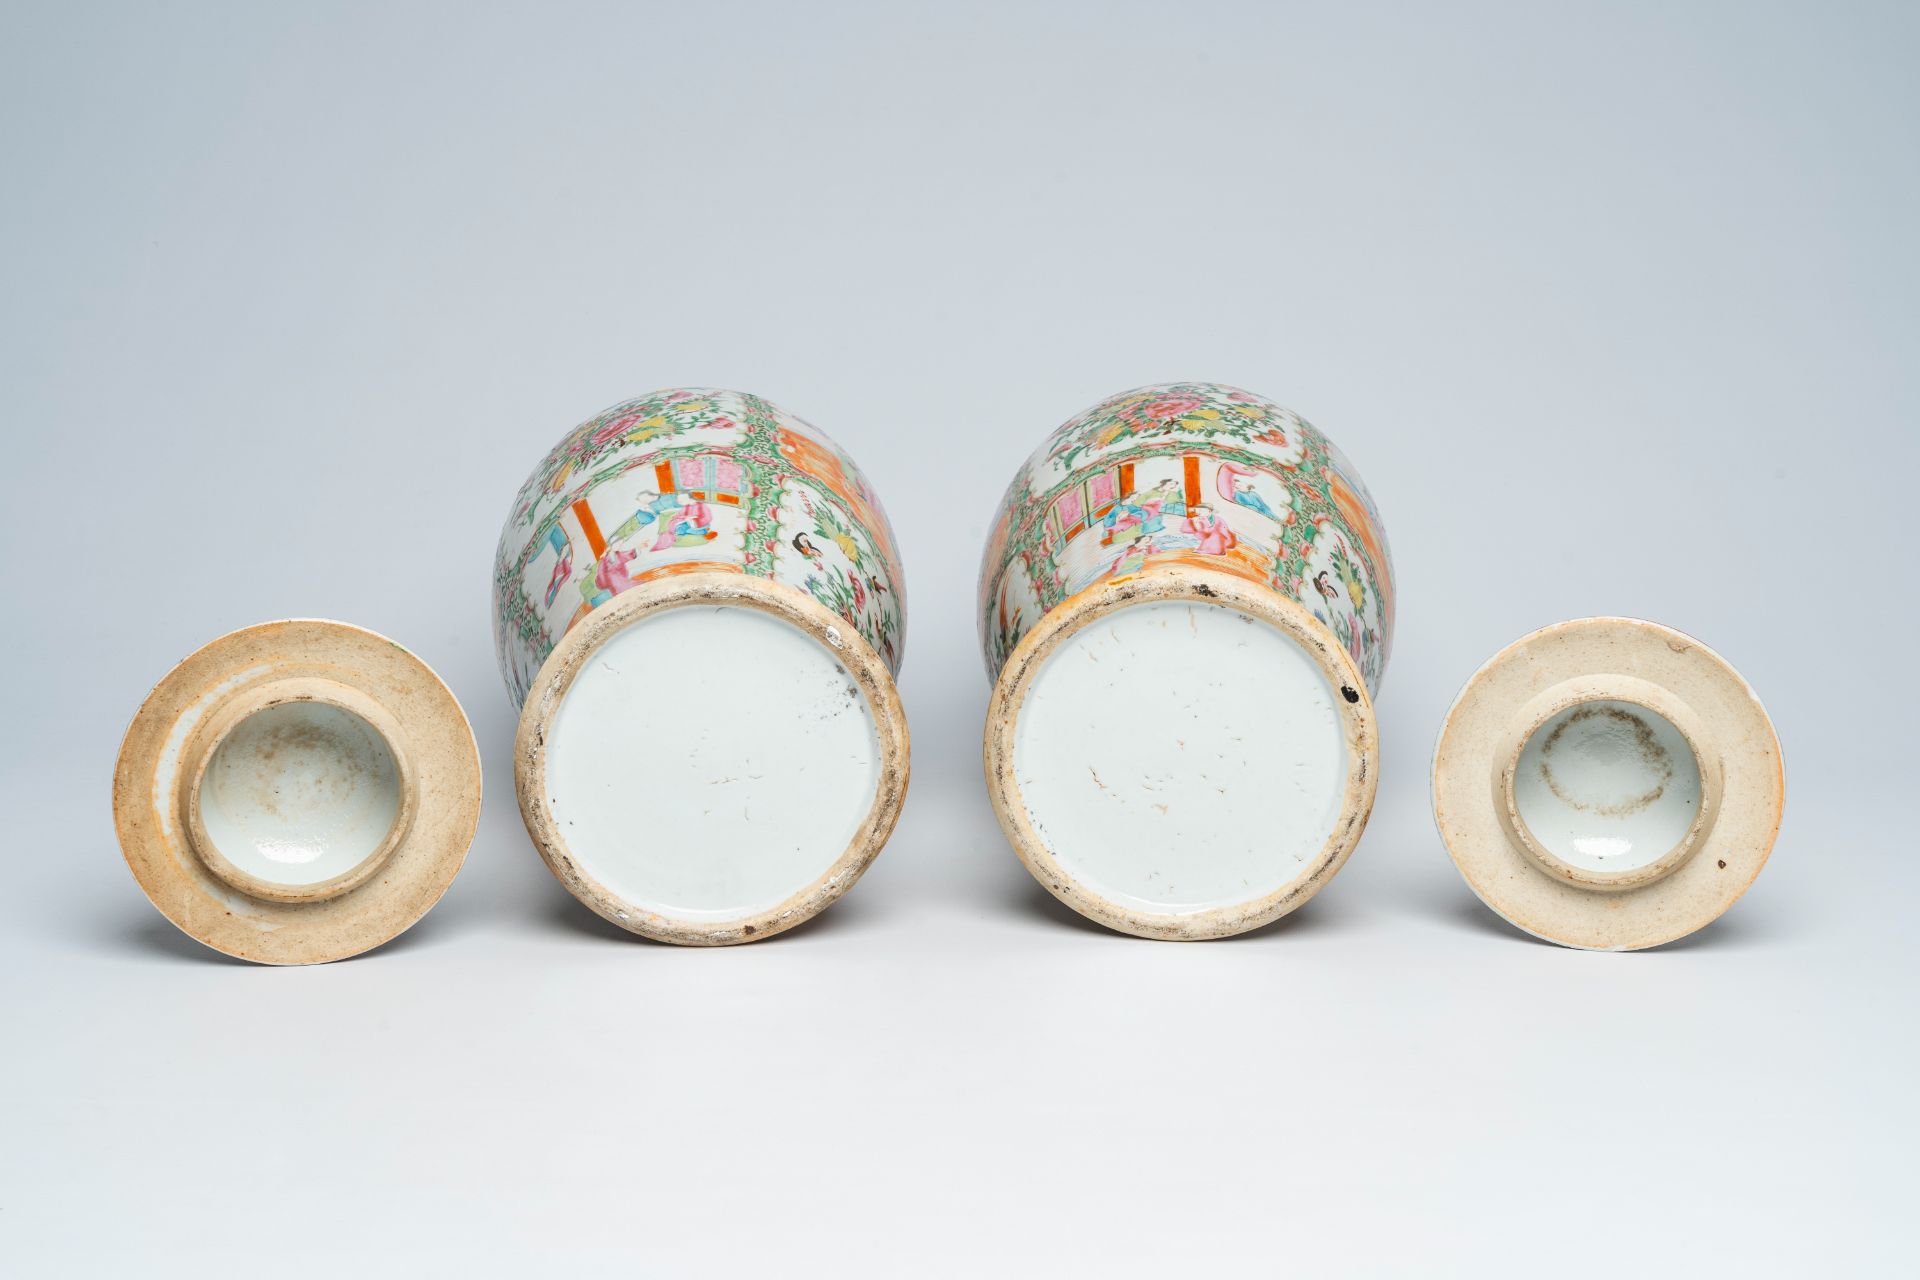 A pair of Chinese Canton famille rose vases and covers with palace scenes and floral design, 19th C. - Image 6 of 6